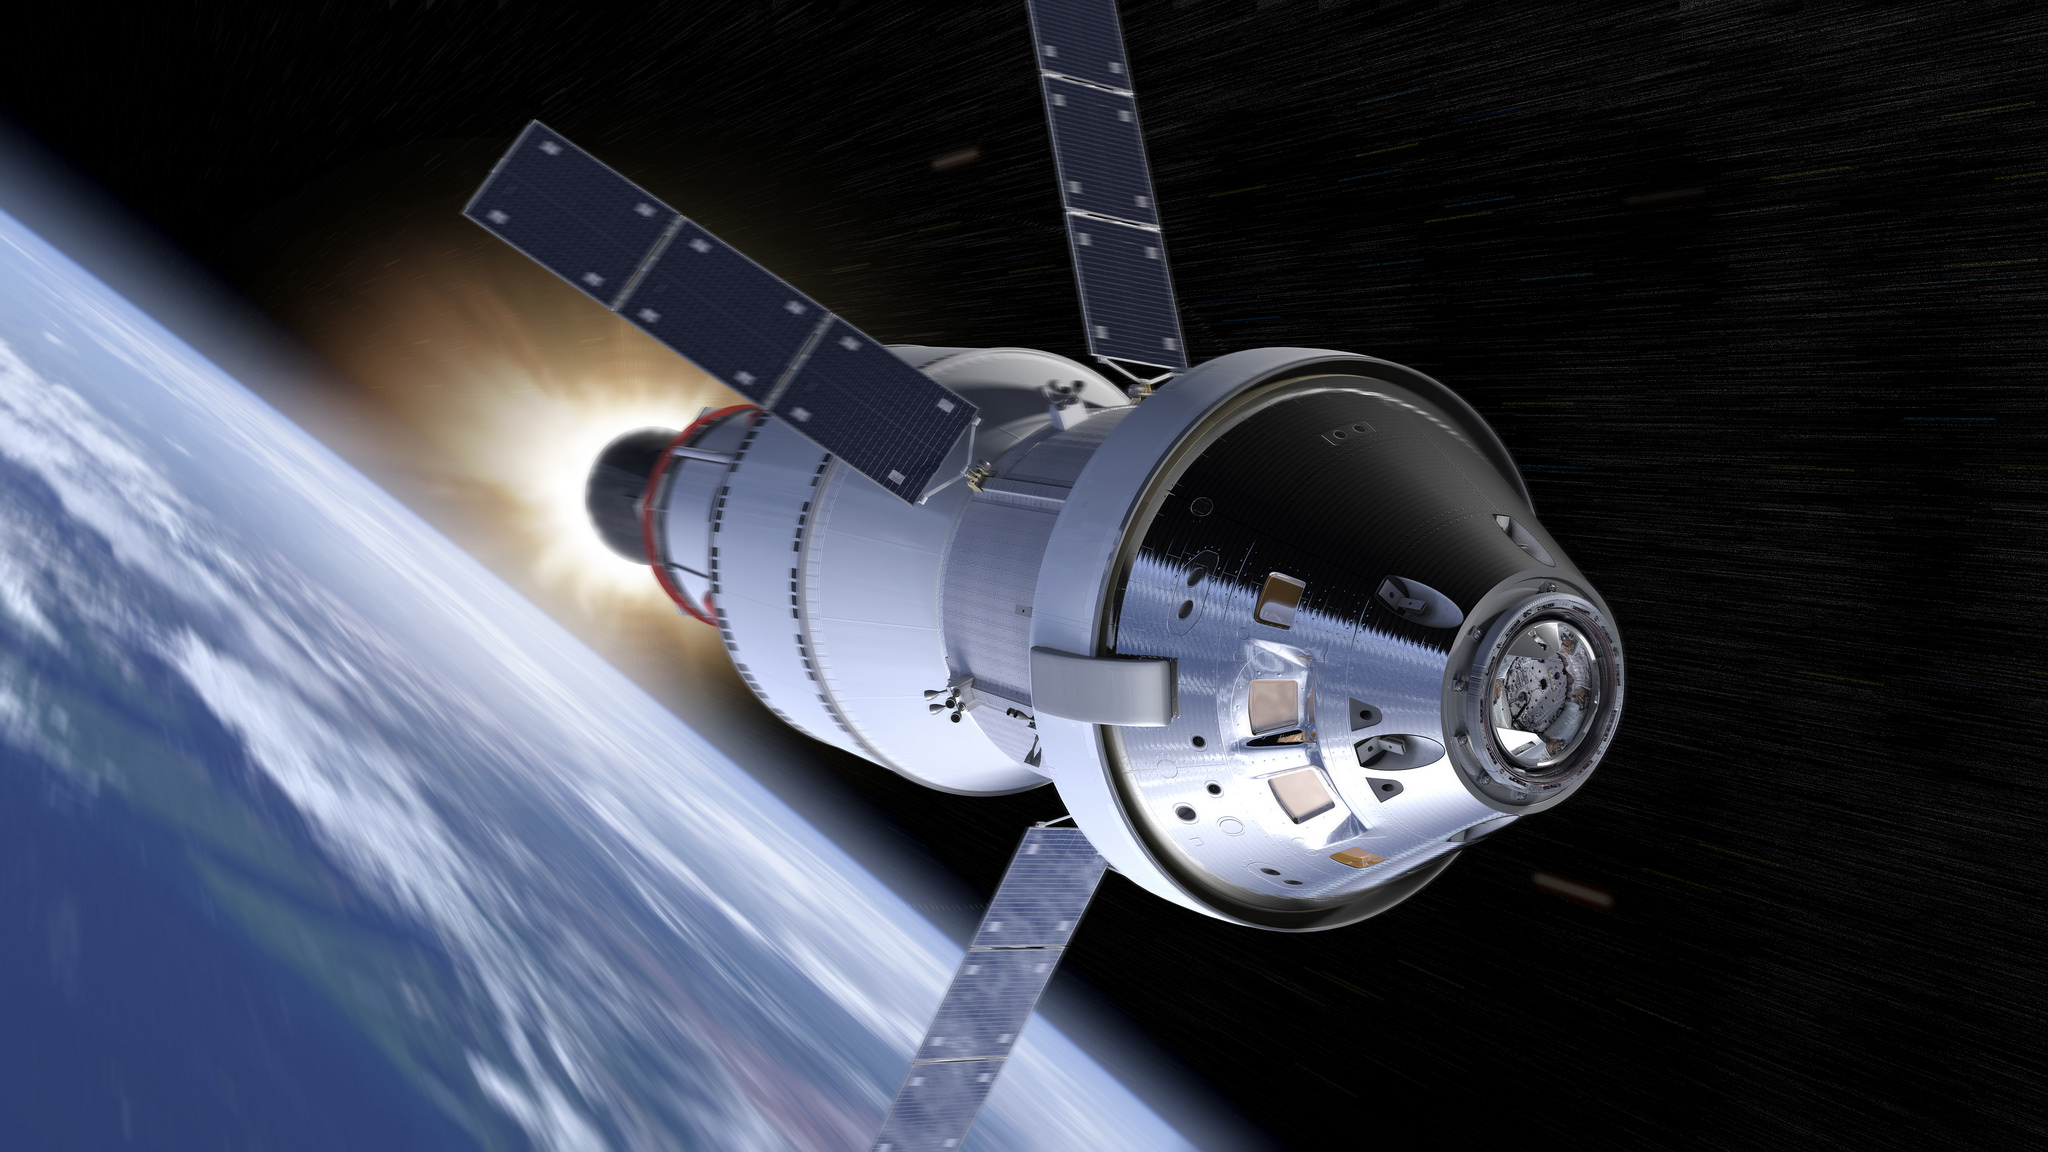 NASA Prepares Orion Spacecraft for Its First Big Mission